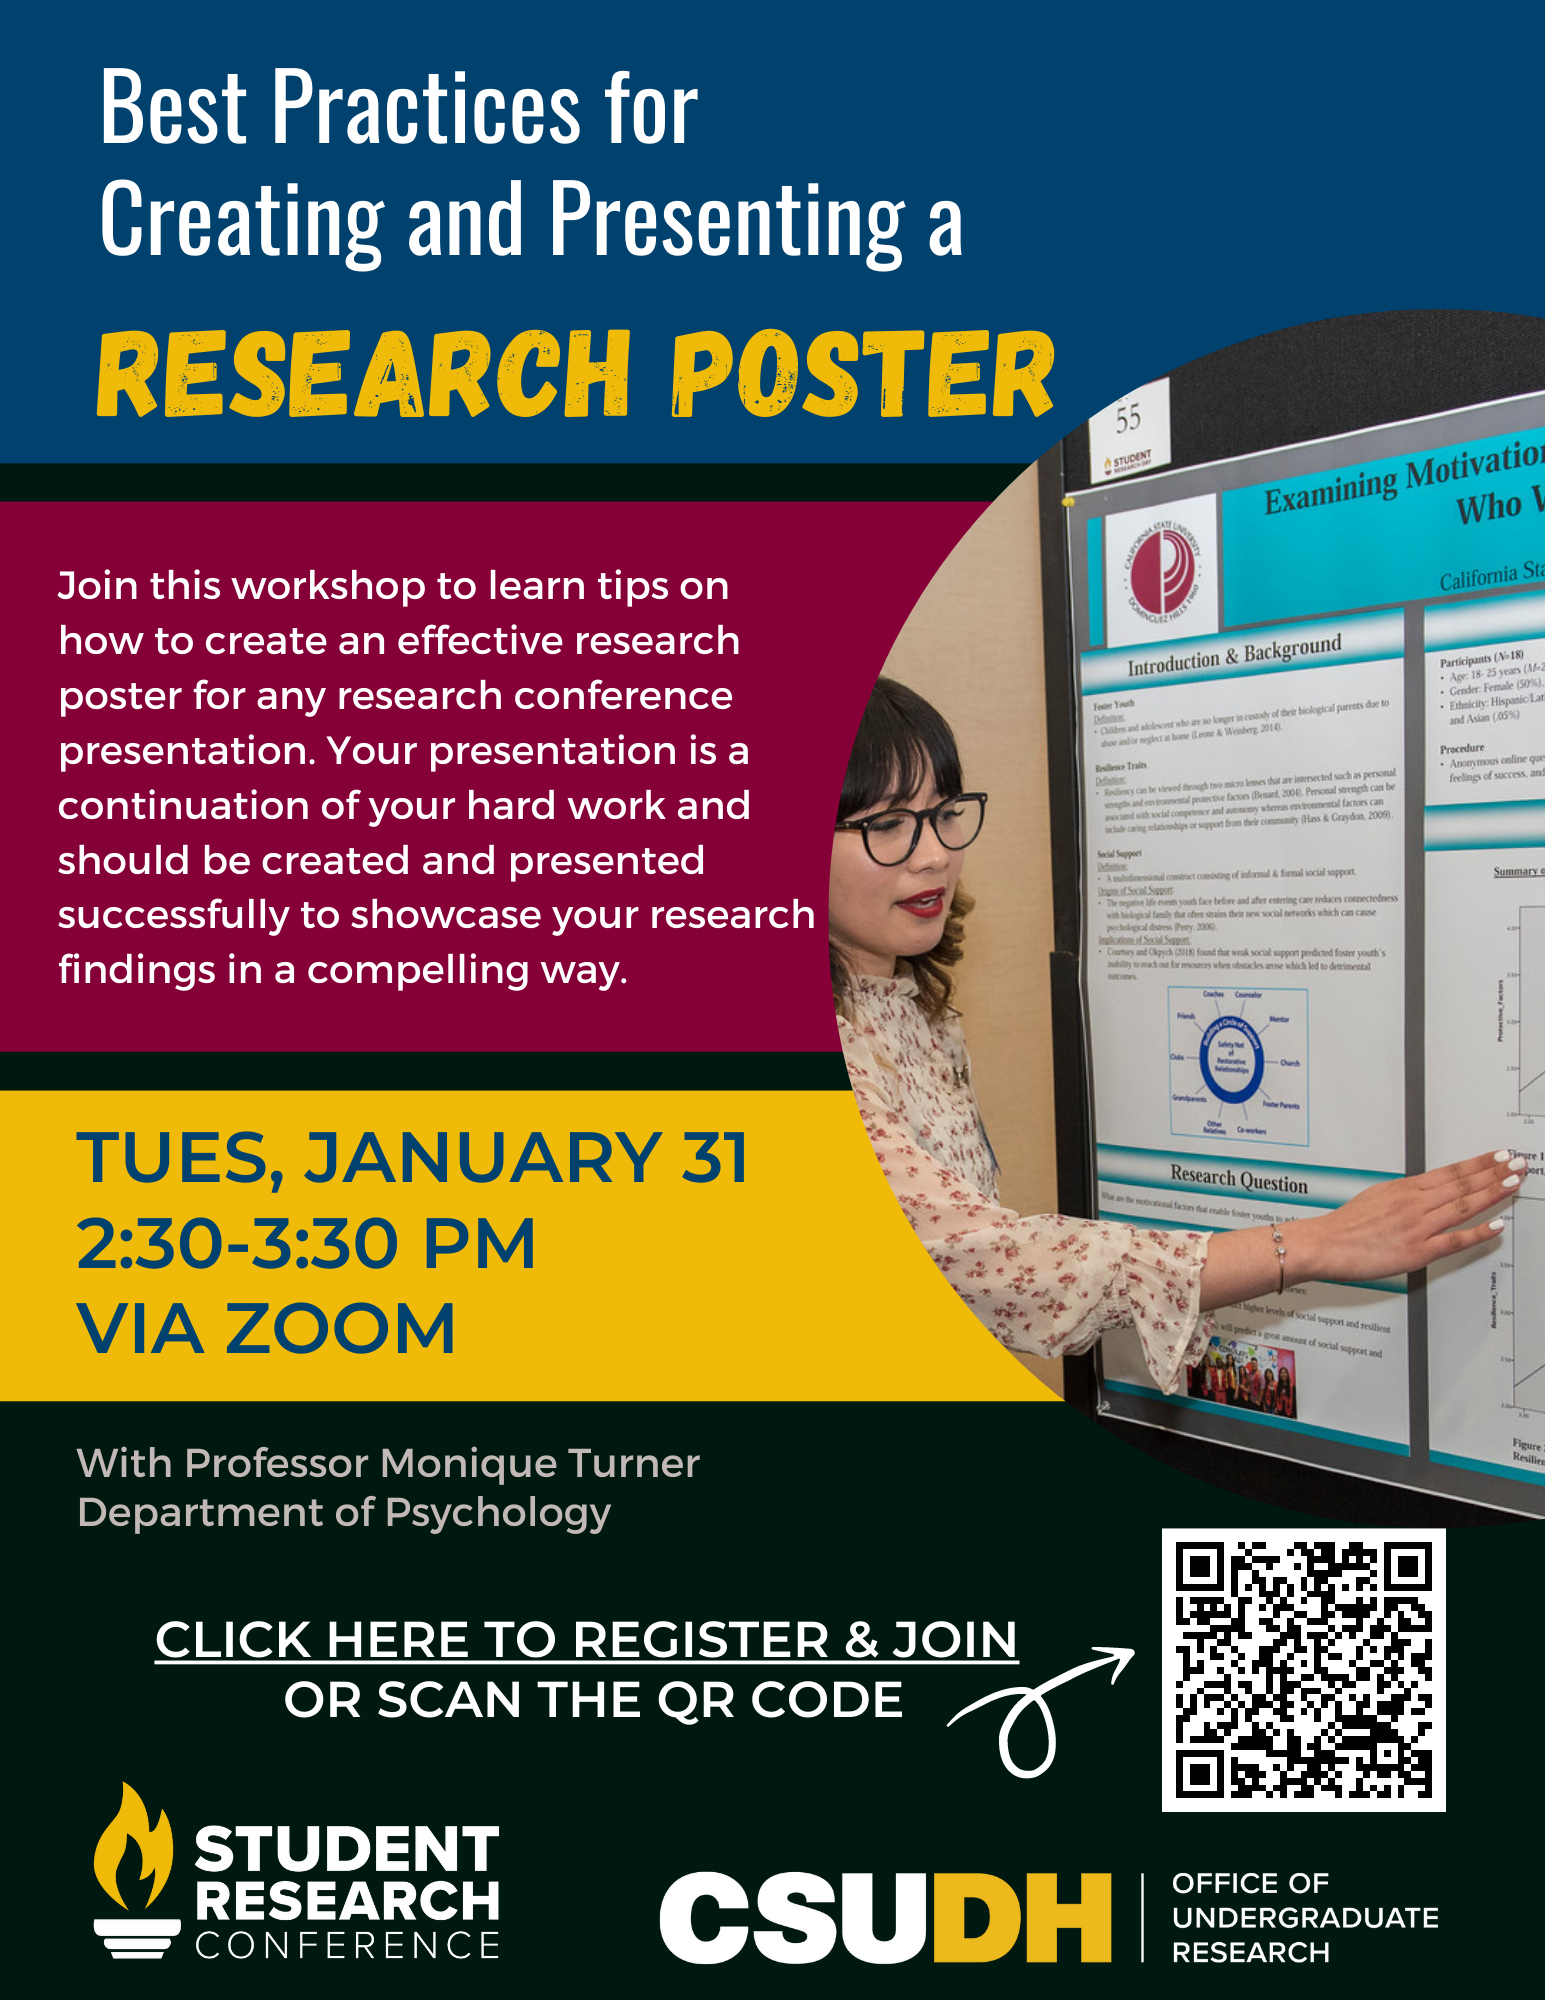 est-Practices-for-Creating-Presenting-a-Research-Poster-Flyer-1-31-23